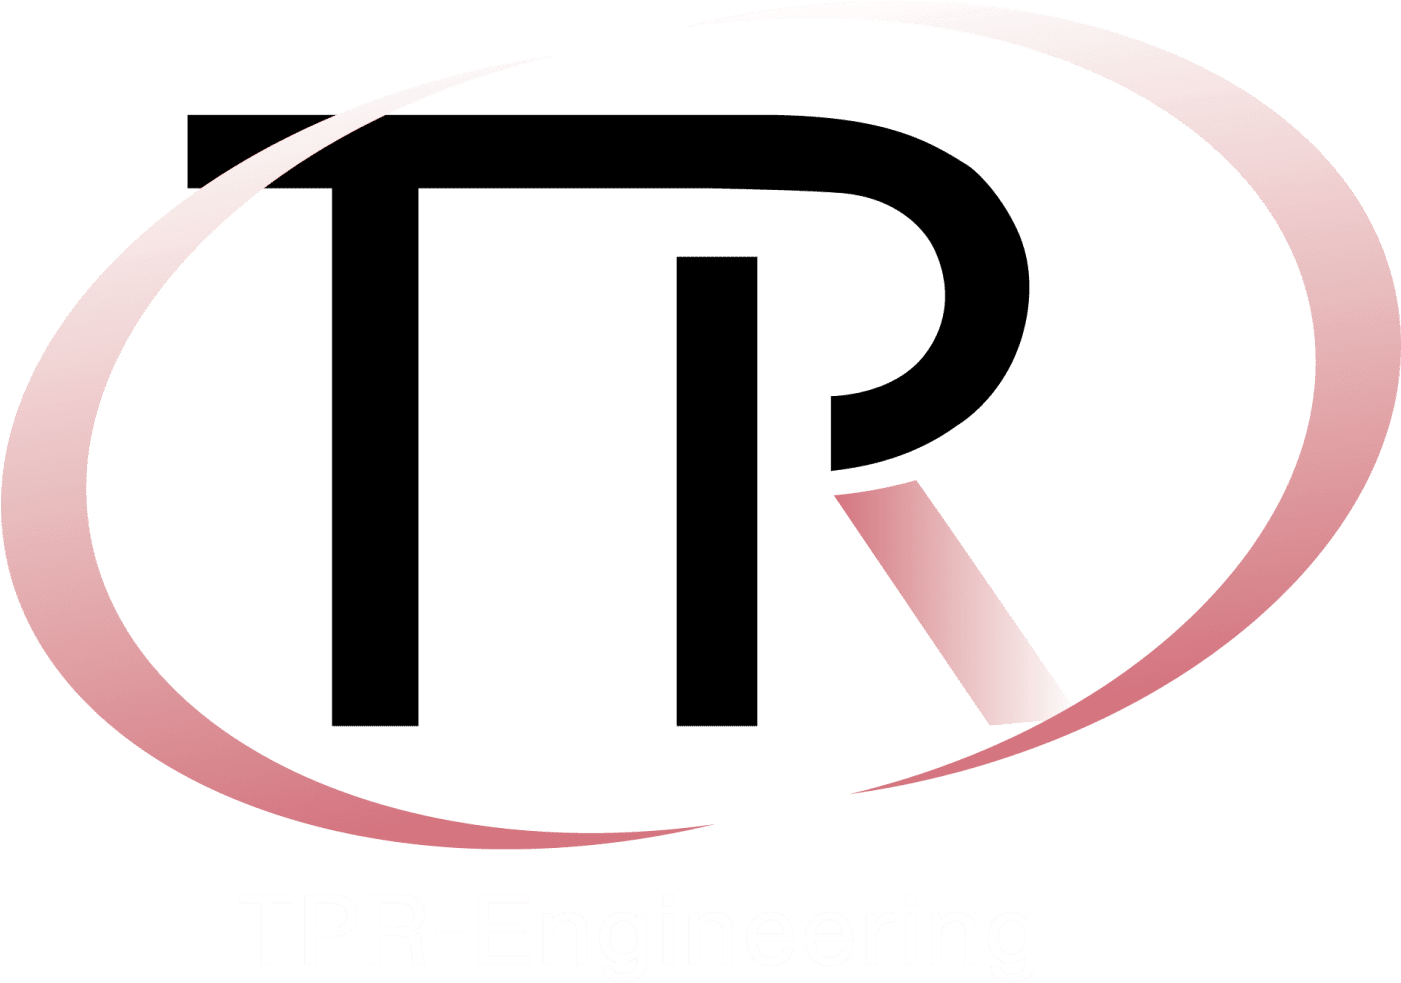 Tpr-engineering - Computer Vision (1400x990)